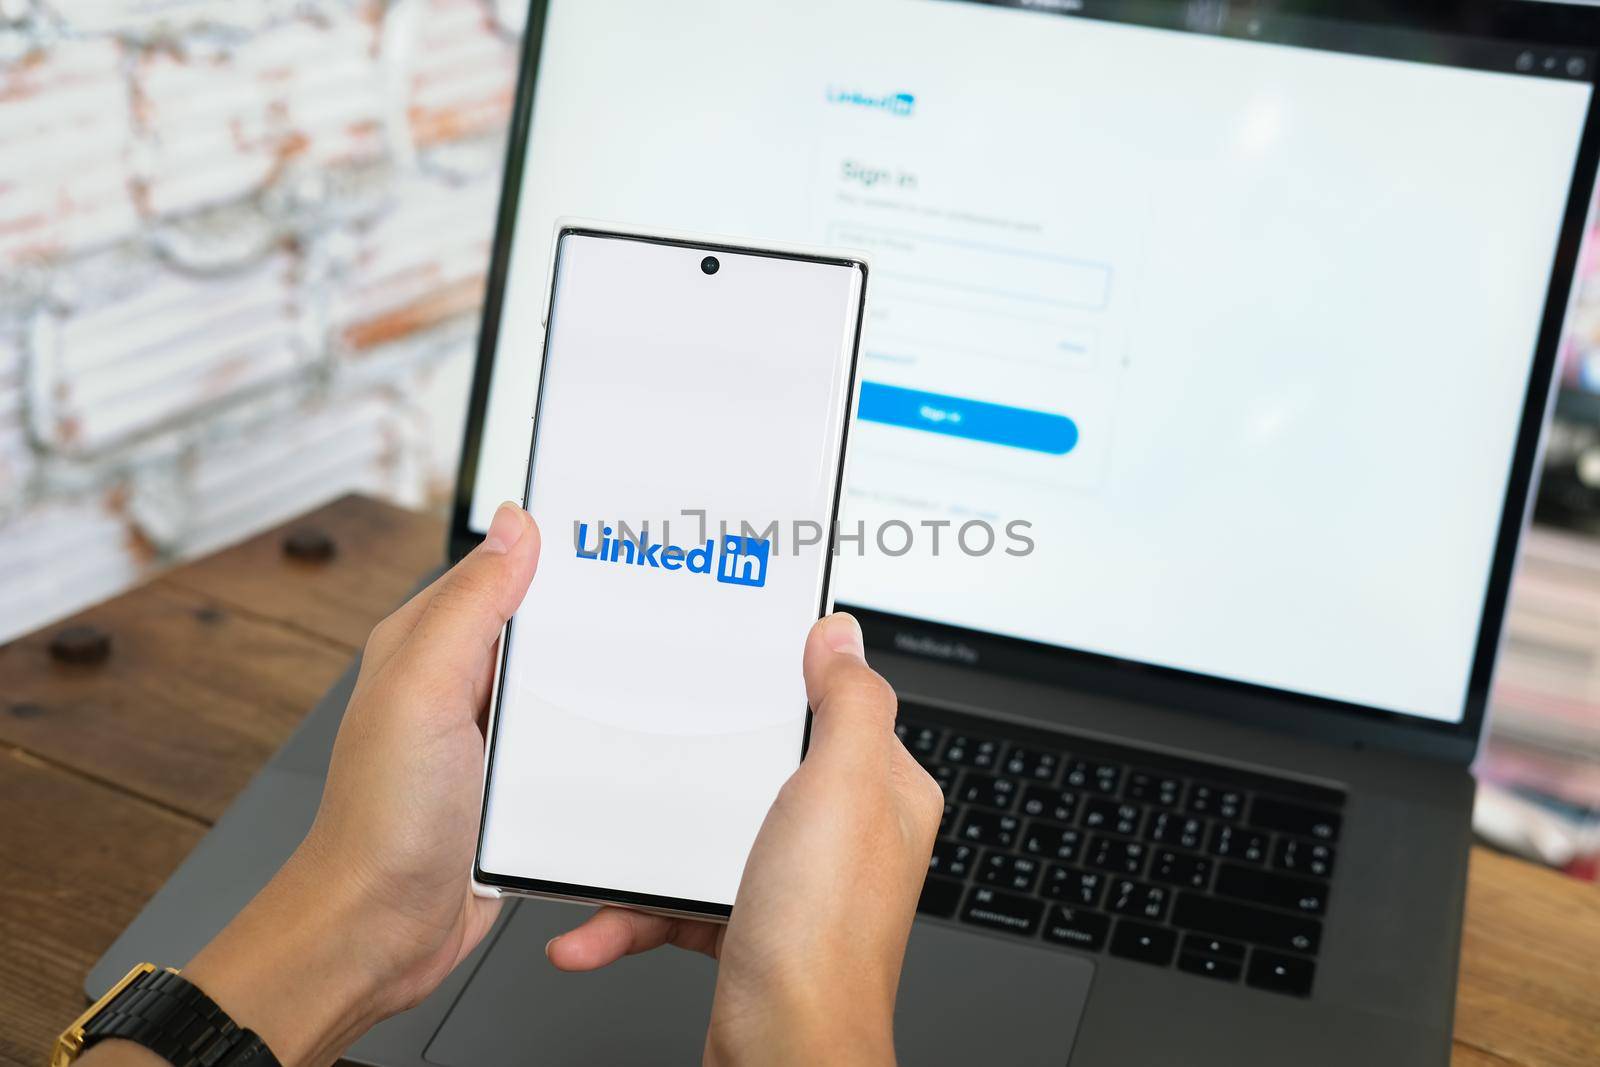 Chiangmai, THAILAND - June 06, 2021: LinkedIn human resource, business and employment-oriented service for job career search app on mobile smartphone.